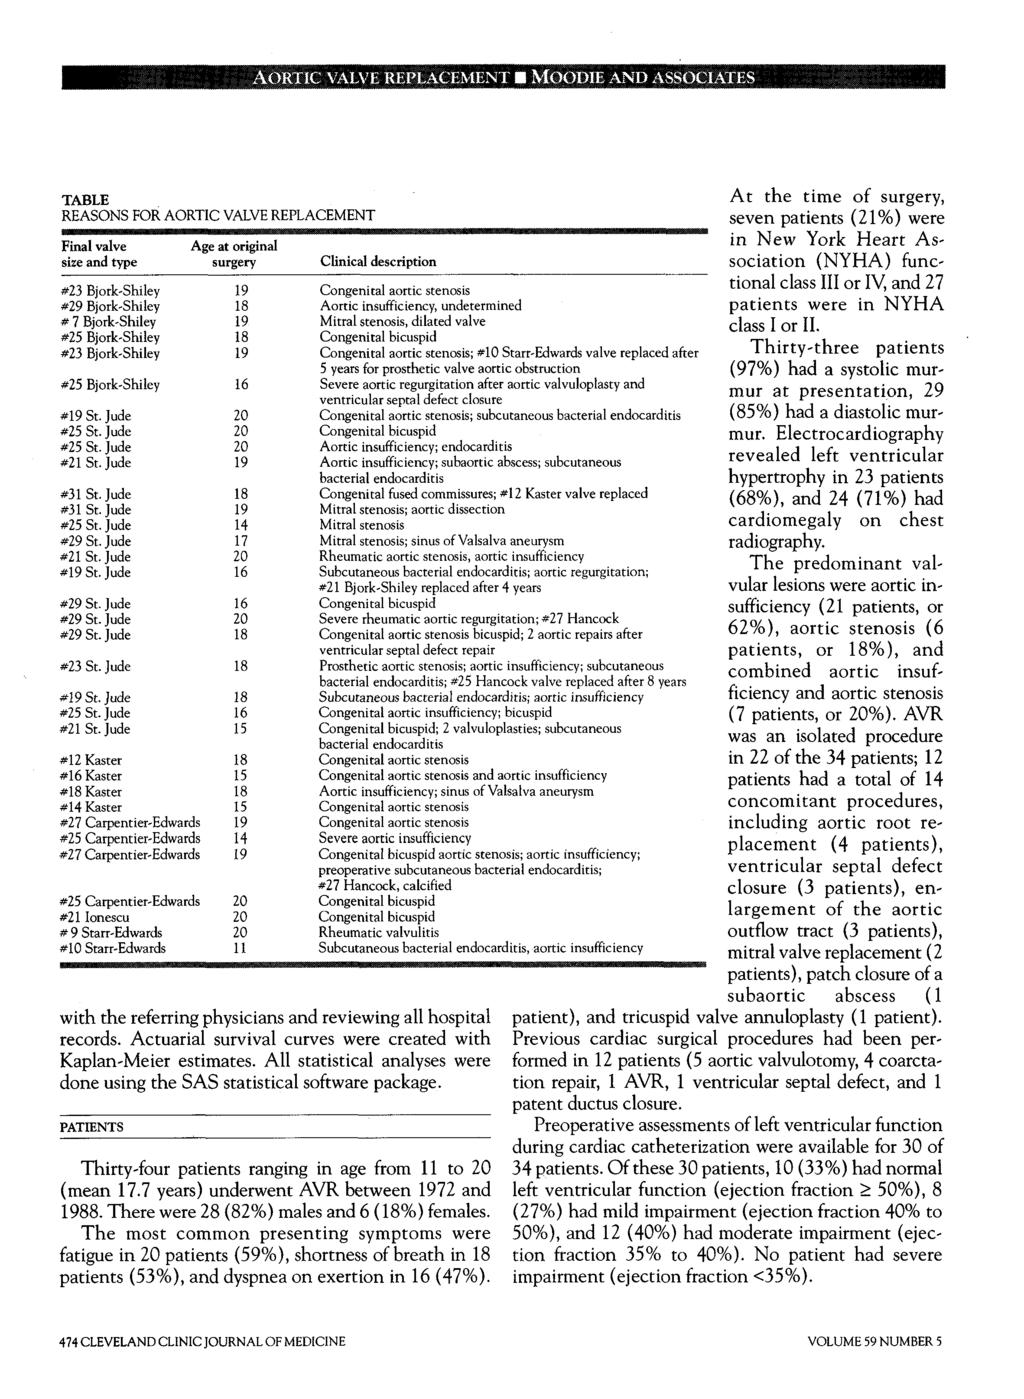 AORTIC VALVE REPLACEMENT MOODIE AND ASSOCIATES TABLE REASONS FOR AORTIC VALVE REPLACEMENT Final valve Age at original size and type surgery Clinical description #23 Bjork-Shiley 19 Congenital aortic